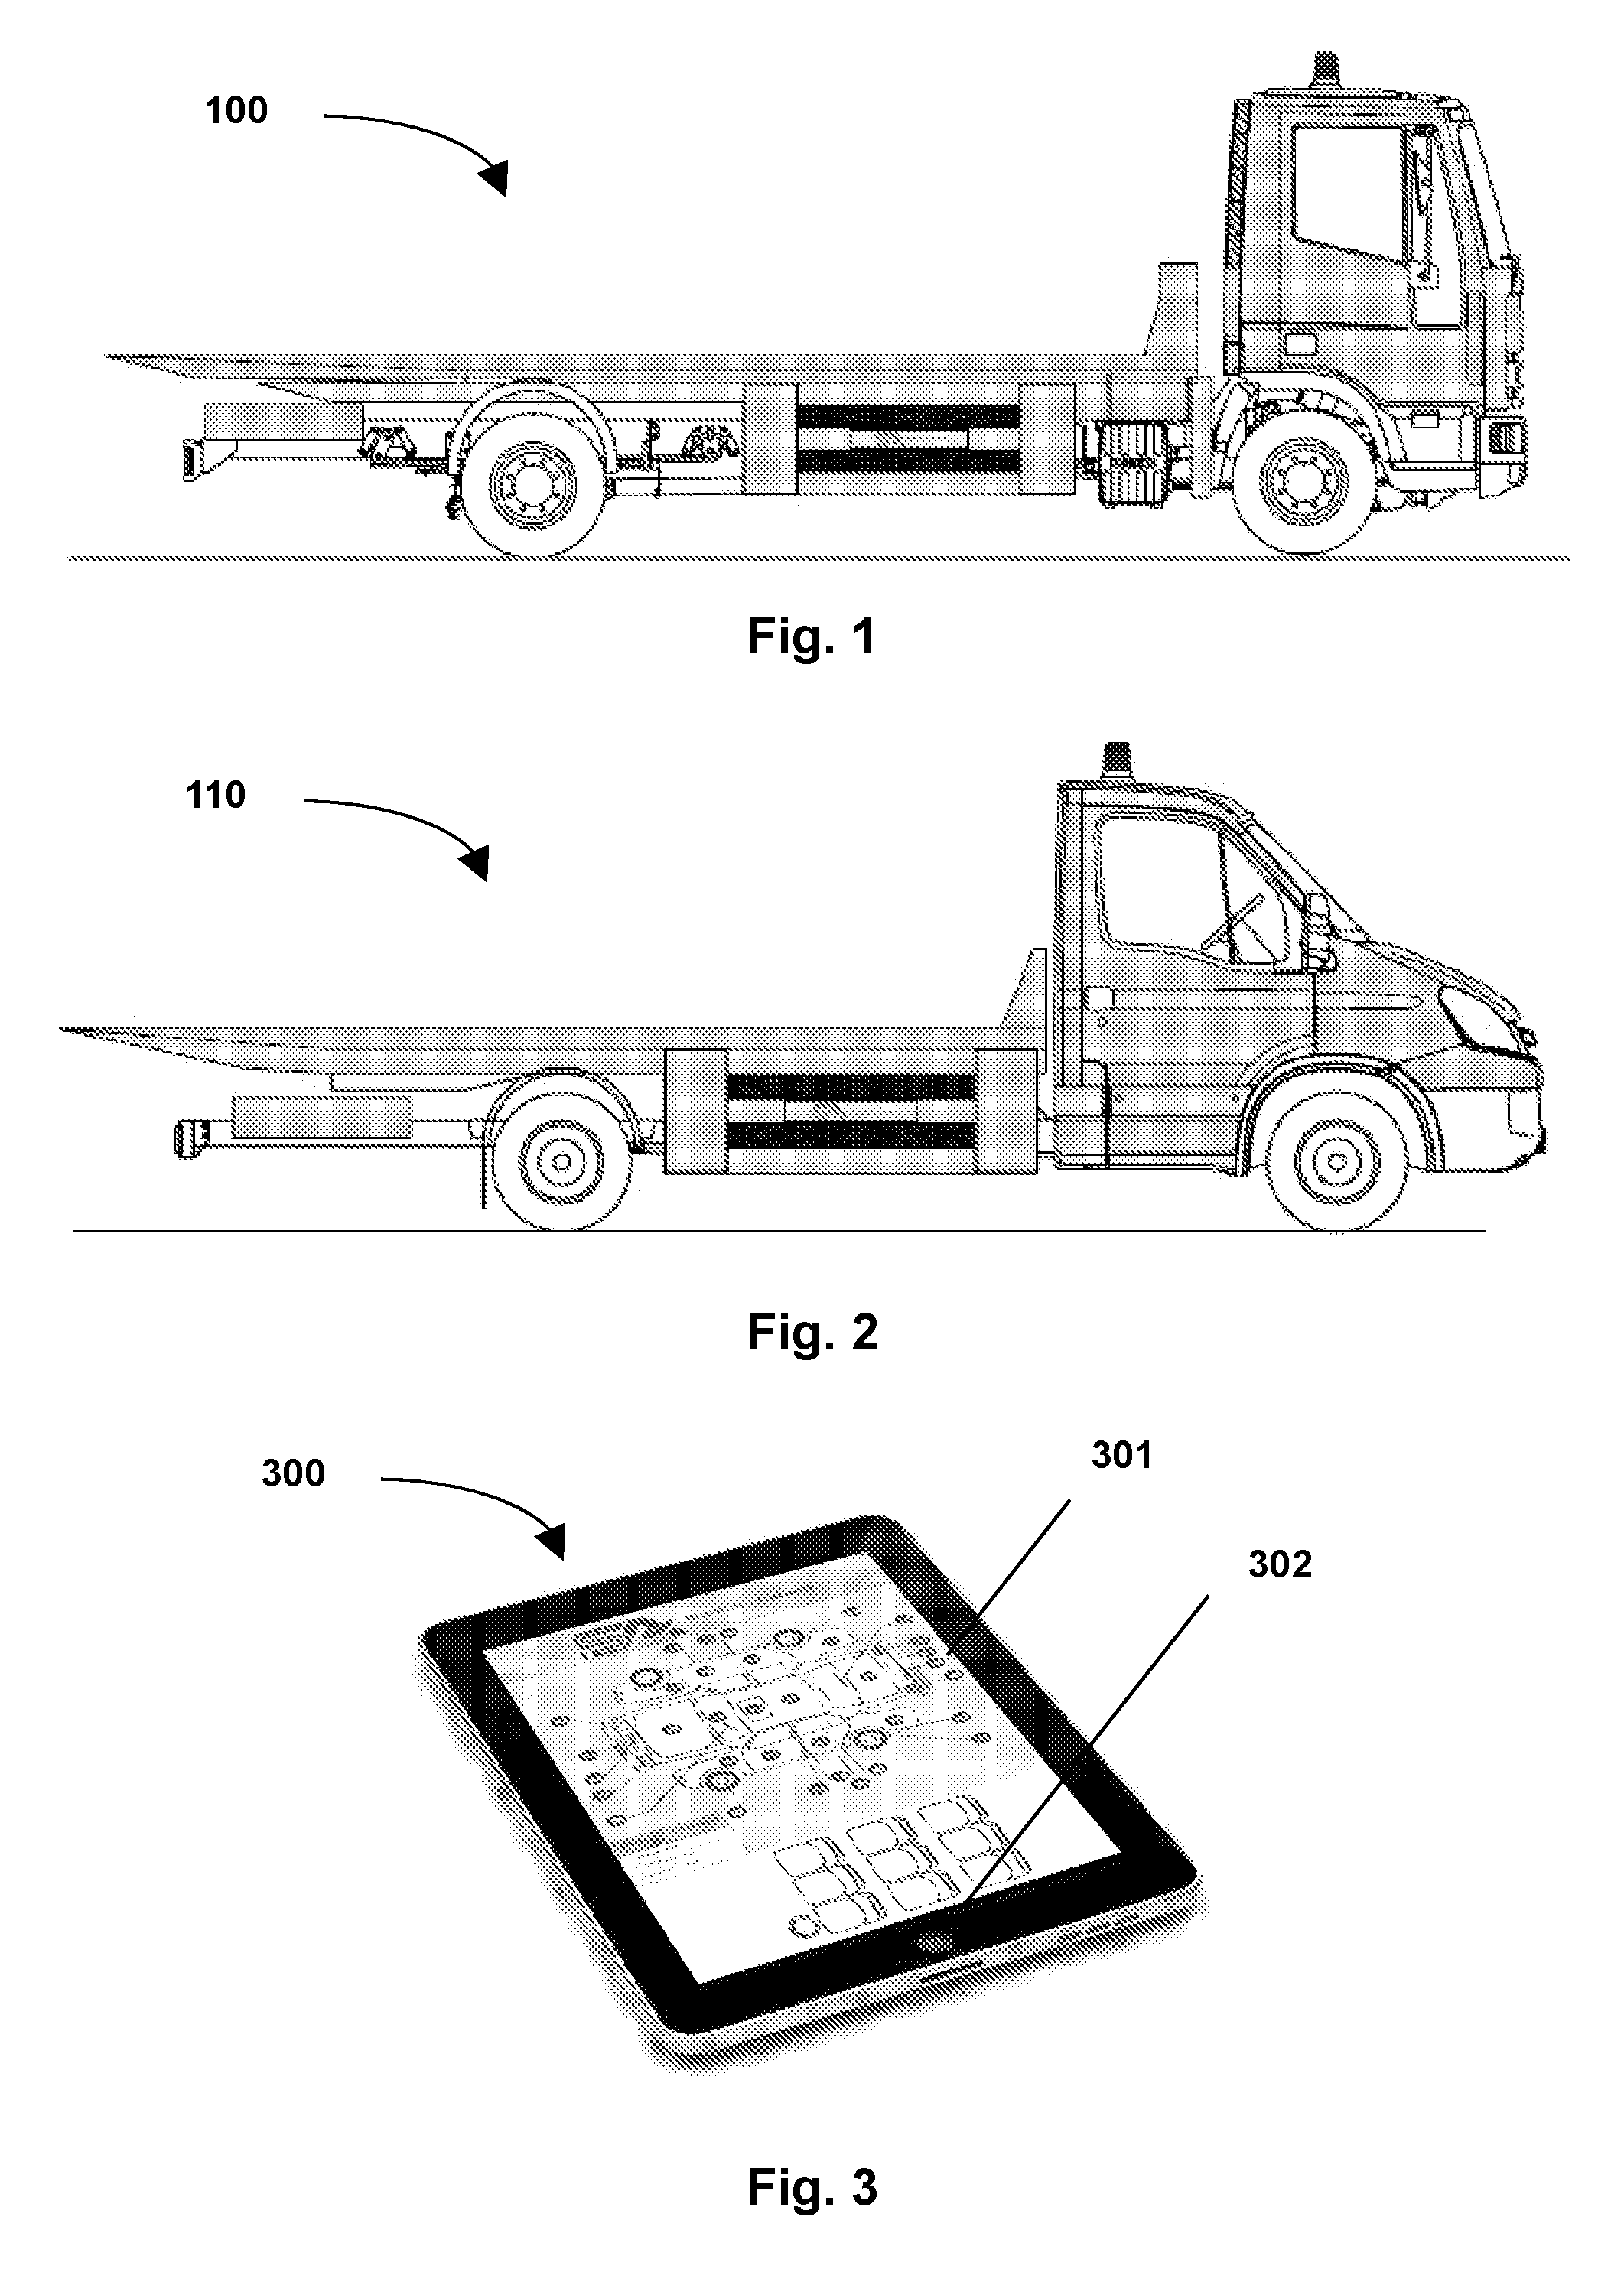 Multi-purpose truck for re-establishment of safe and practicable road conditions after car accidents, through cleaning of the road platform